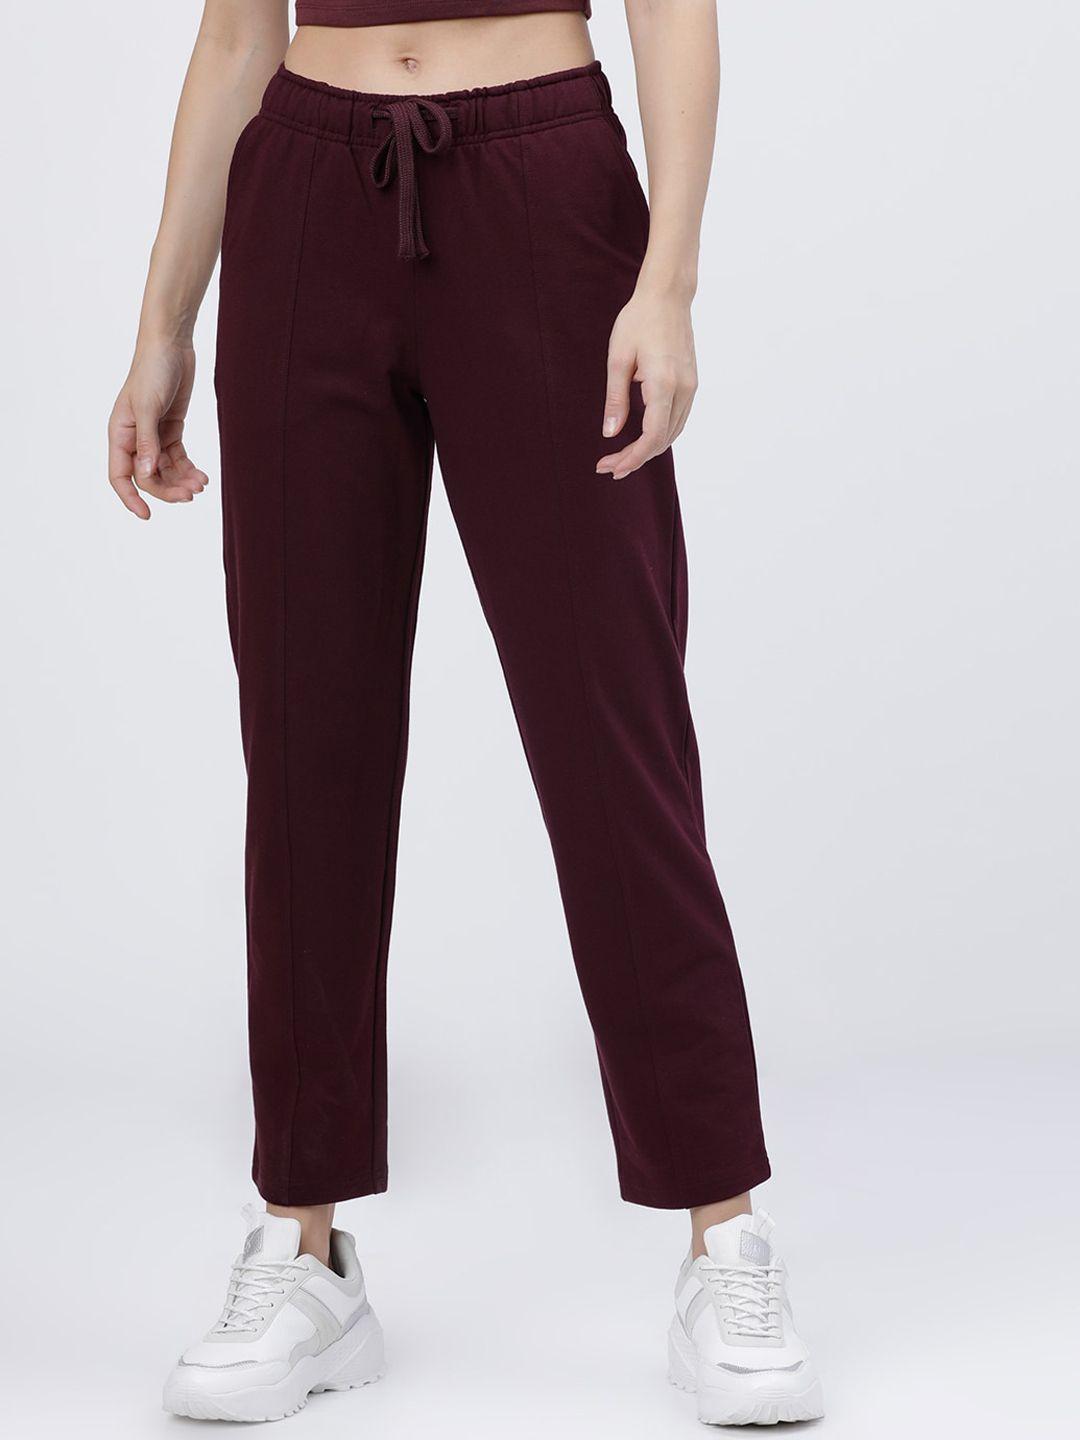 tokyo-talkies-women-maroon-solid-port-royale-casual-straight-fit-track-pants